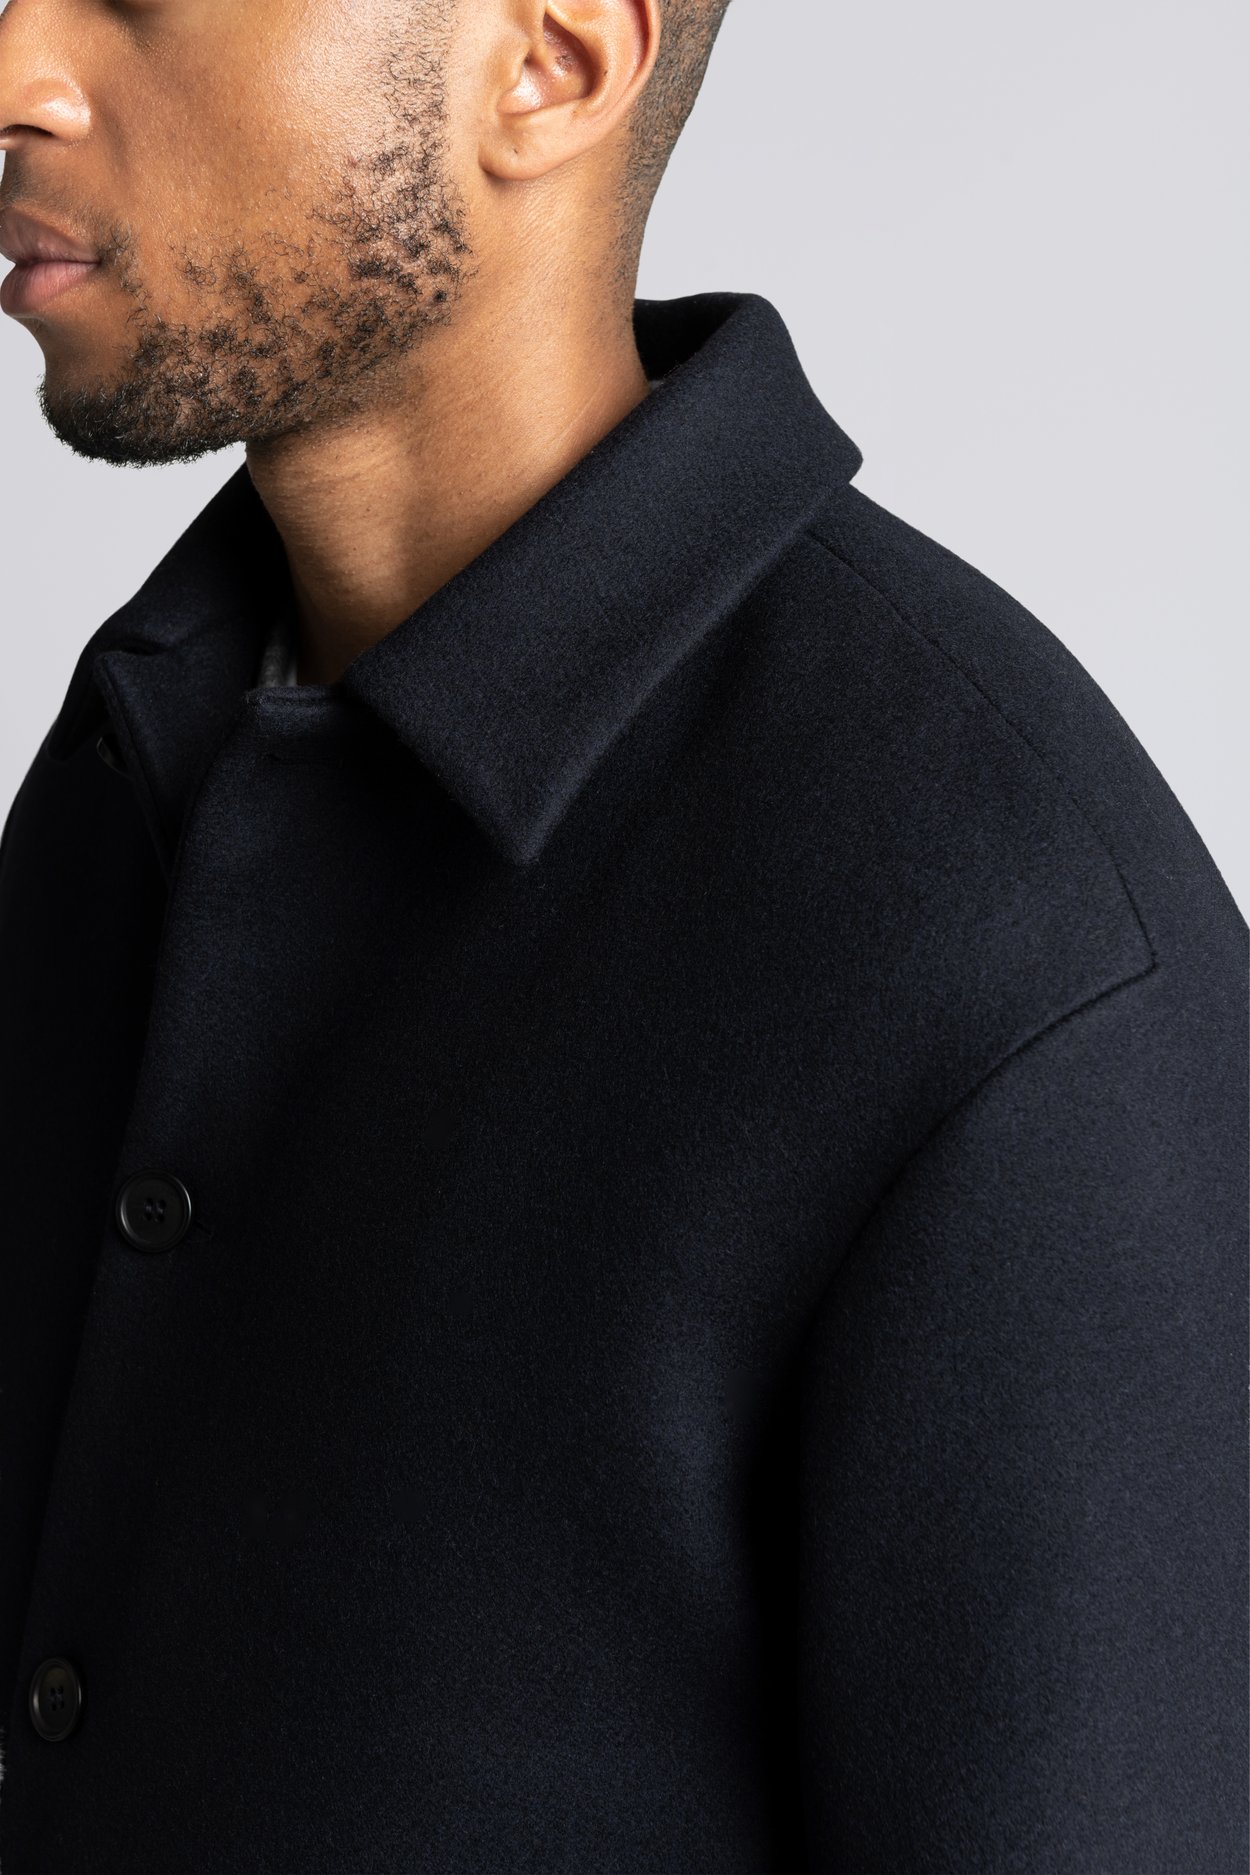 The Wool Coat made from 100% Recycled Post Consumer Wool is back in stock